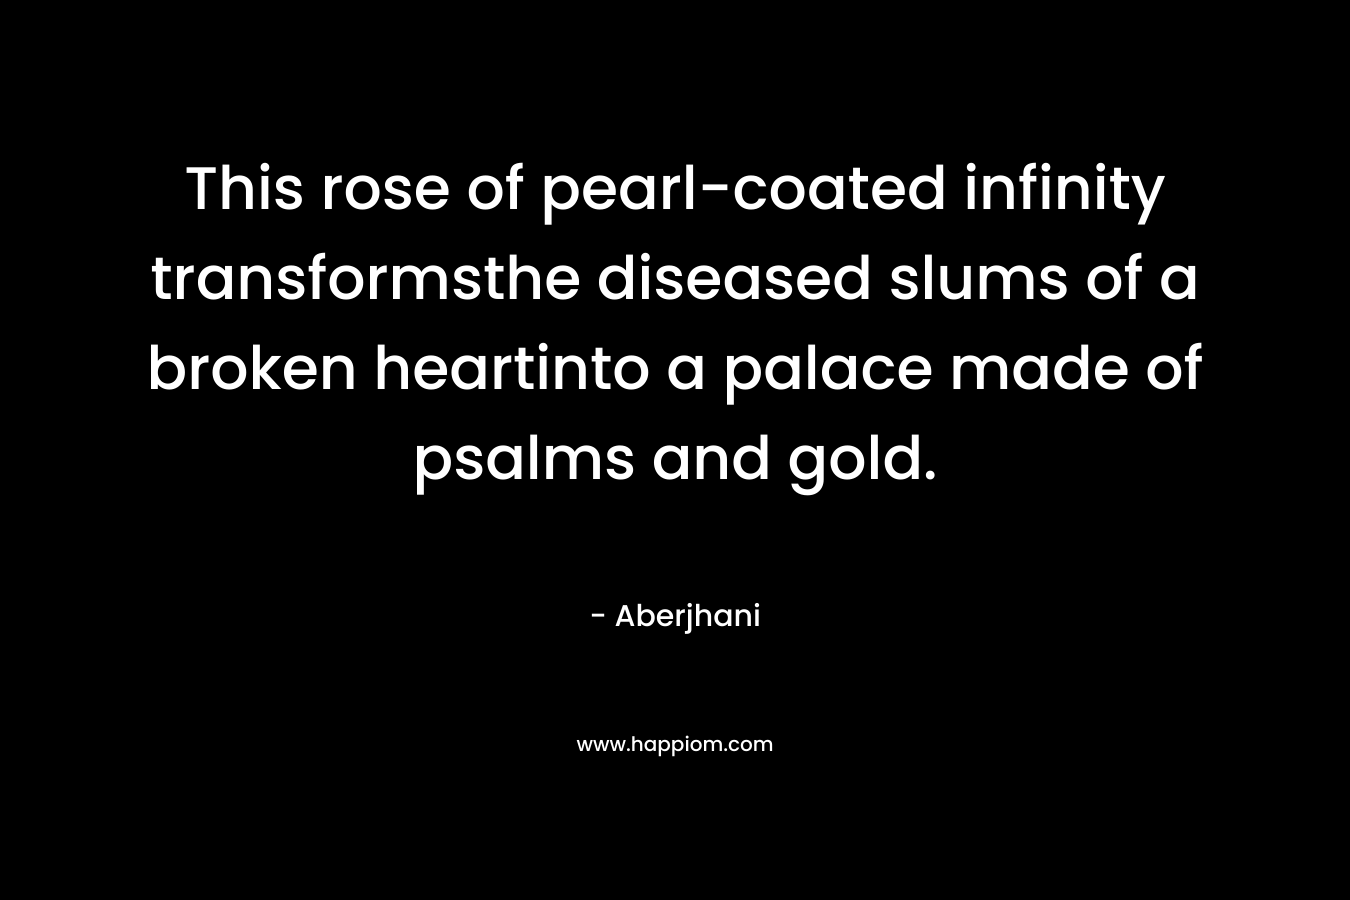 This rose of pearl-coated infinity transformsthe diseased slums of a broken heartinto a palace made of psalms and gold. – Aberjhani